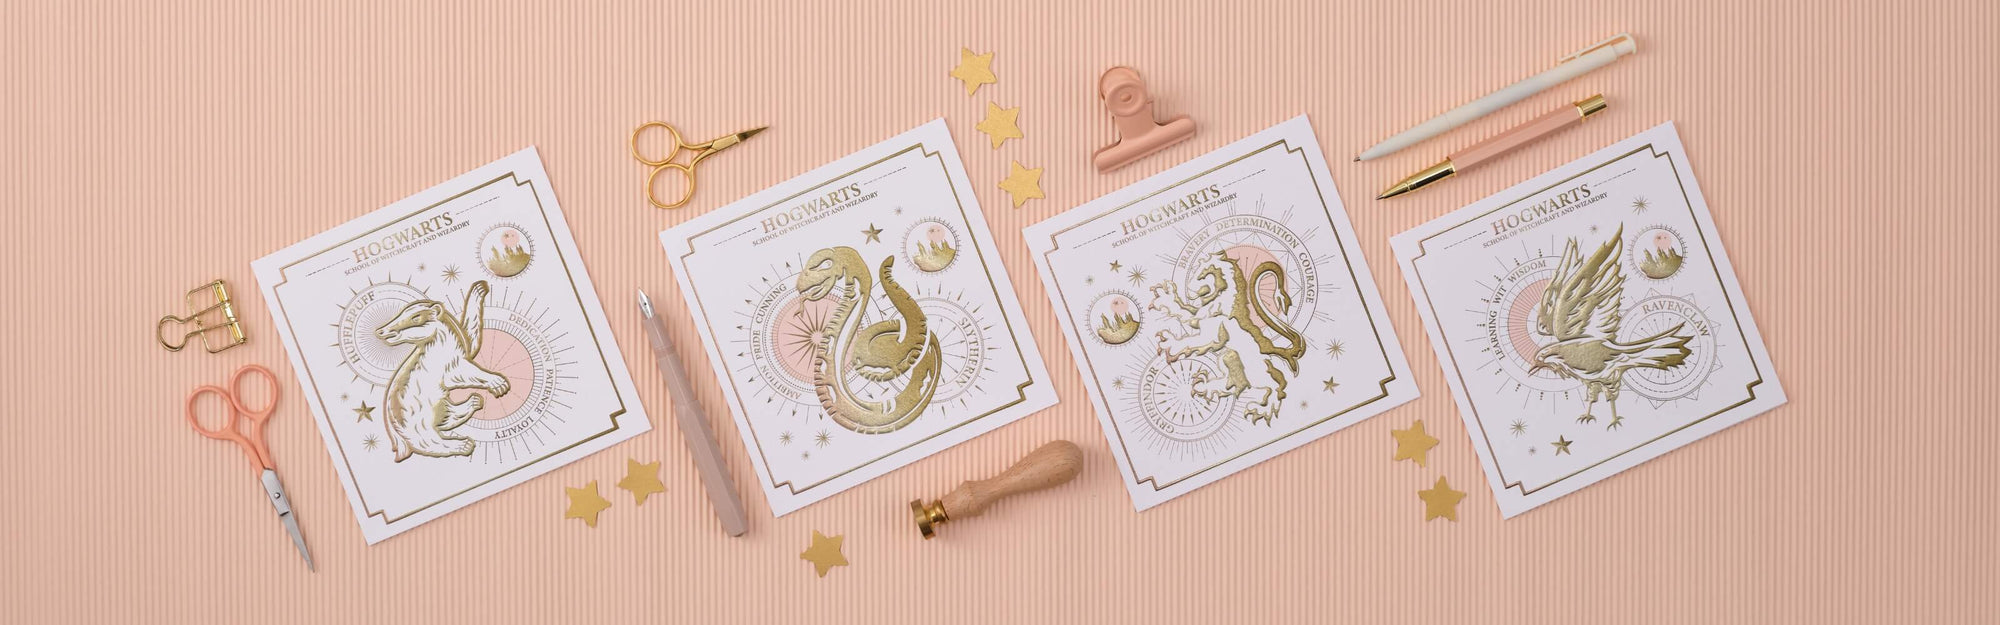 Harry Potter Greeting Cards